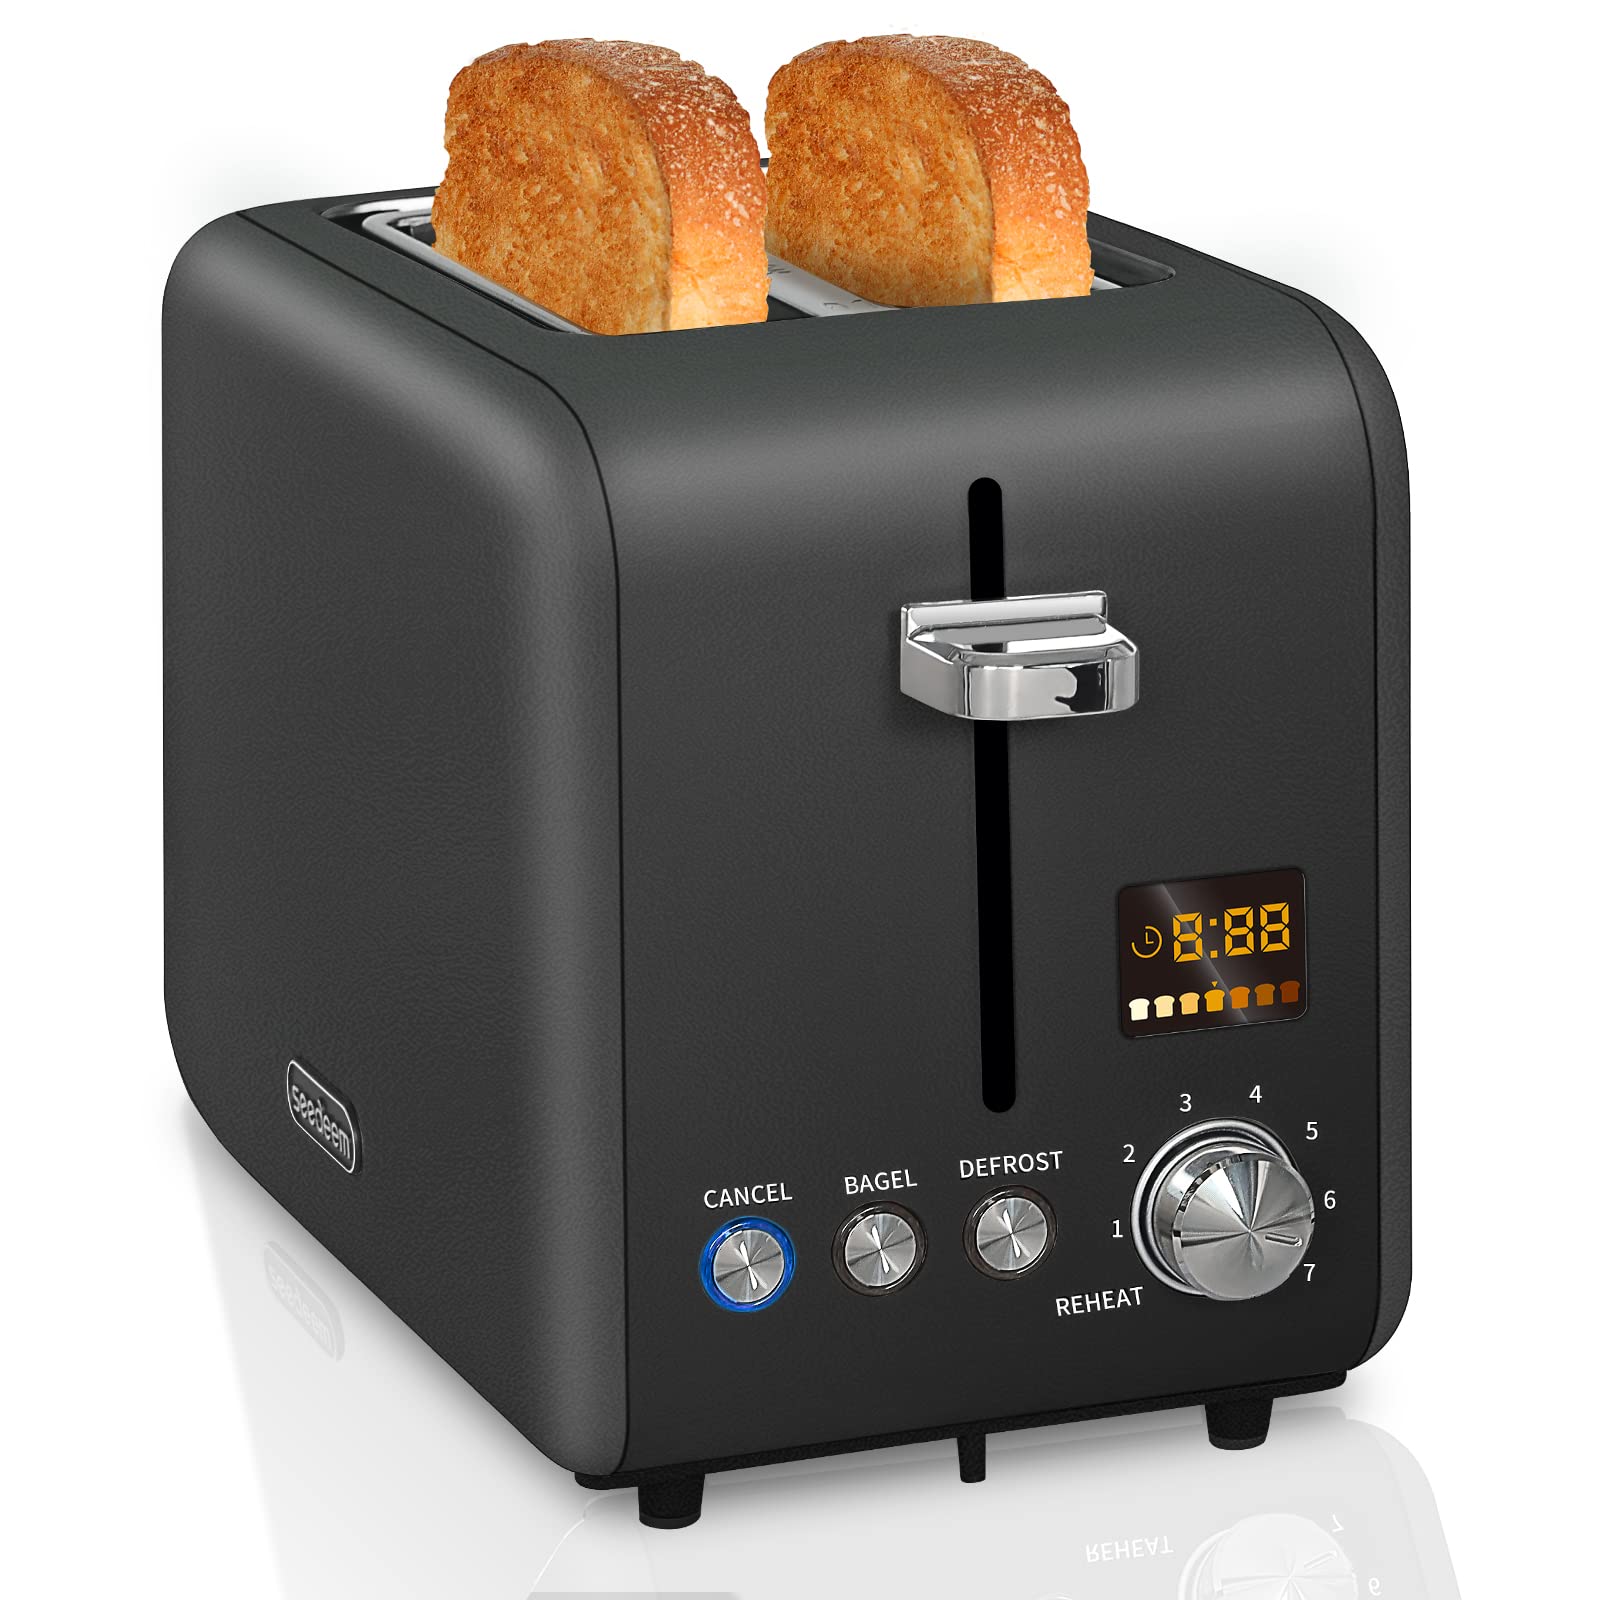 SEEDEEM Toaster 2 Slice, Stainless Steel Bread Toaster with colorful LcD Display, 7 Bread Shade Settings, 14 Wide Slots Toaster 